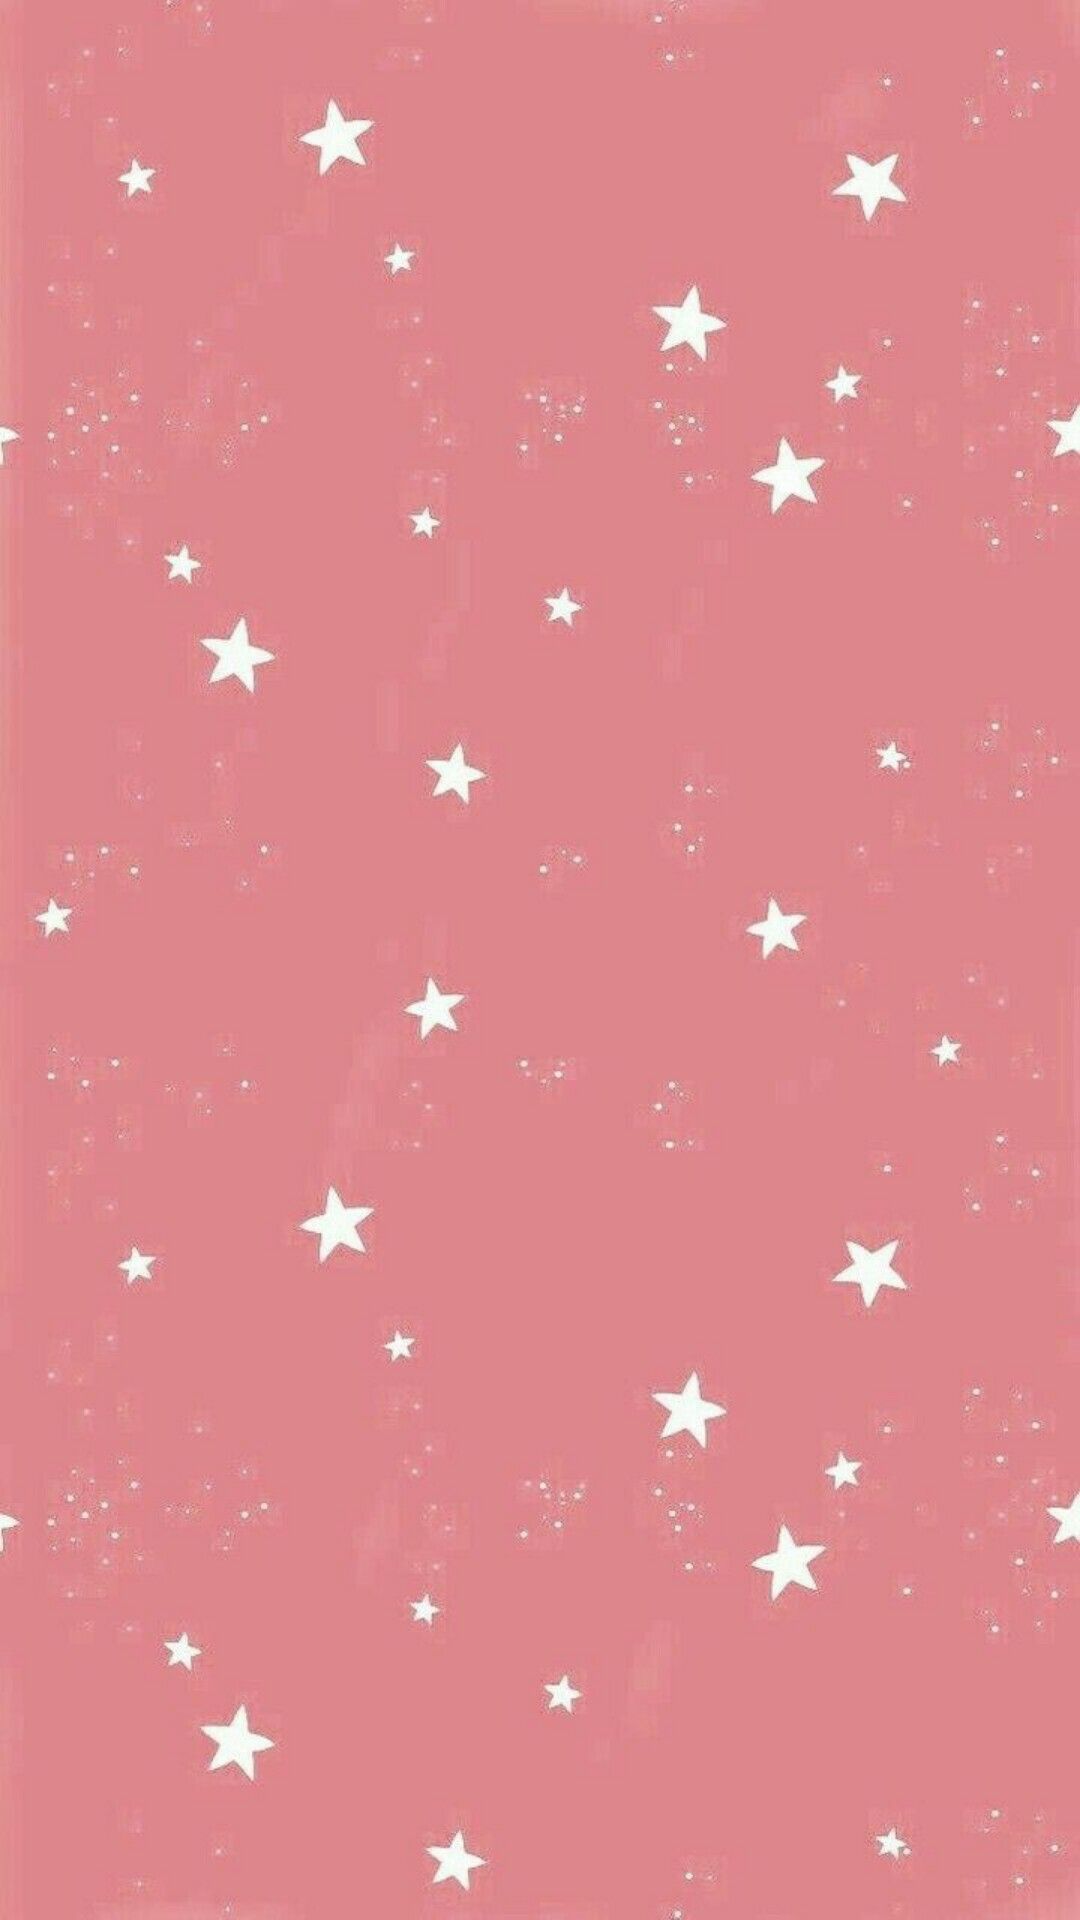 35 Pink Aesthetic Pictures  Colorful Rainbow  Sparkle Star Wallpaper   Idea Wallpapers  iPhone WallpapersColor Schemes